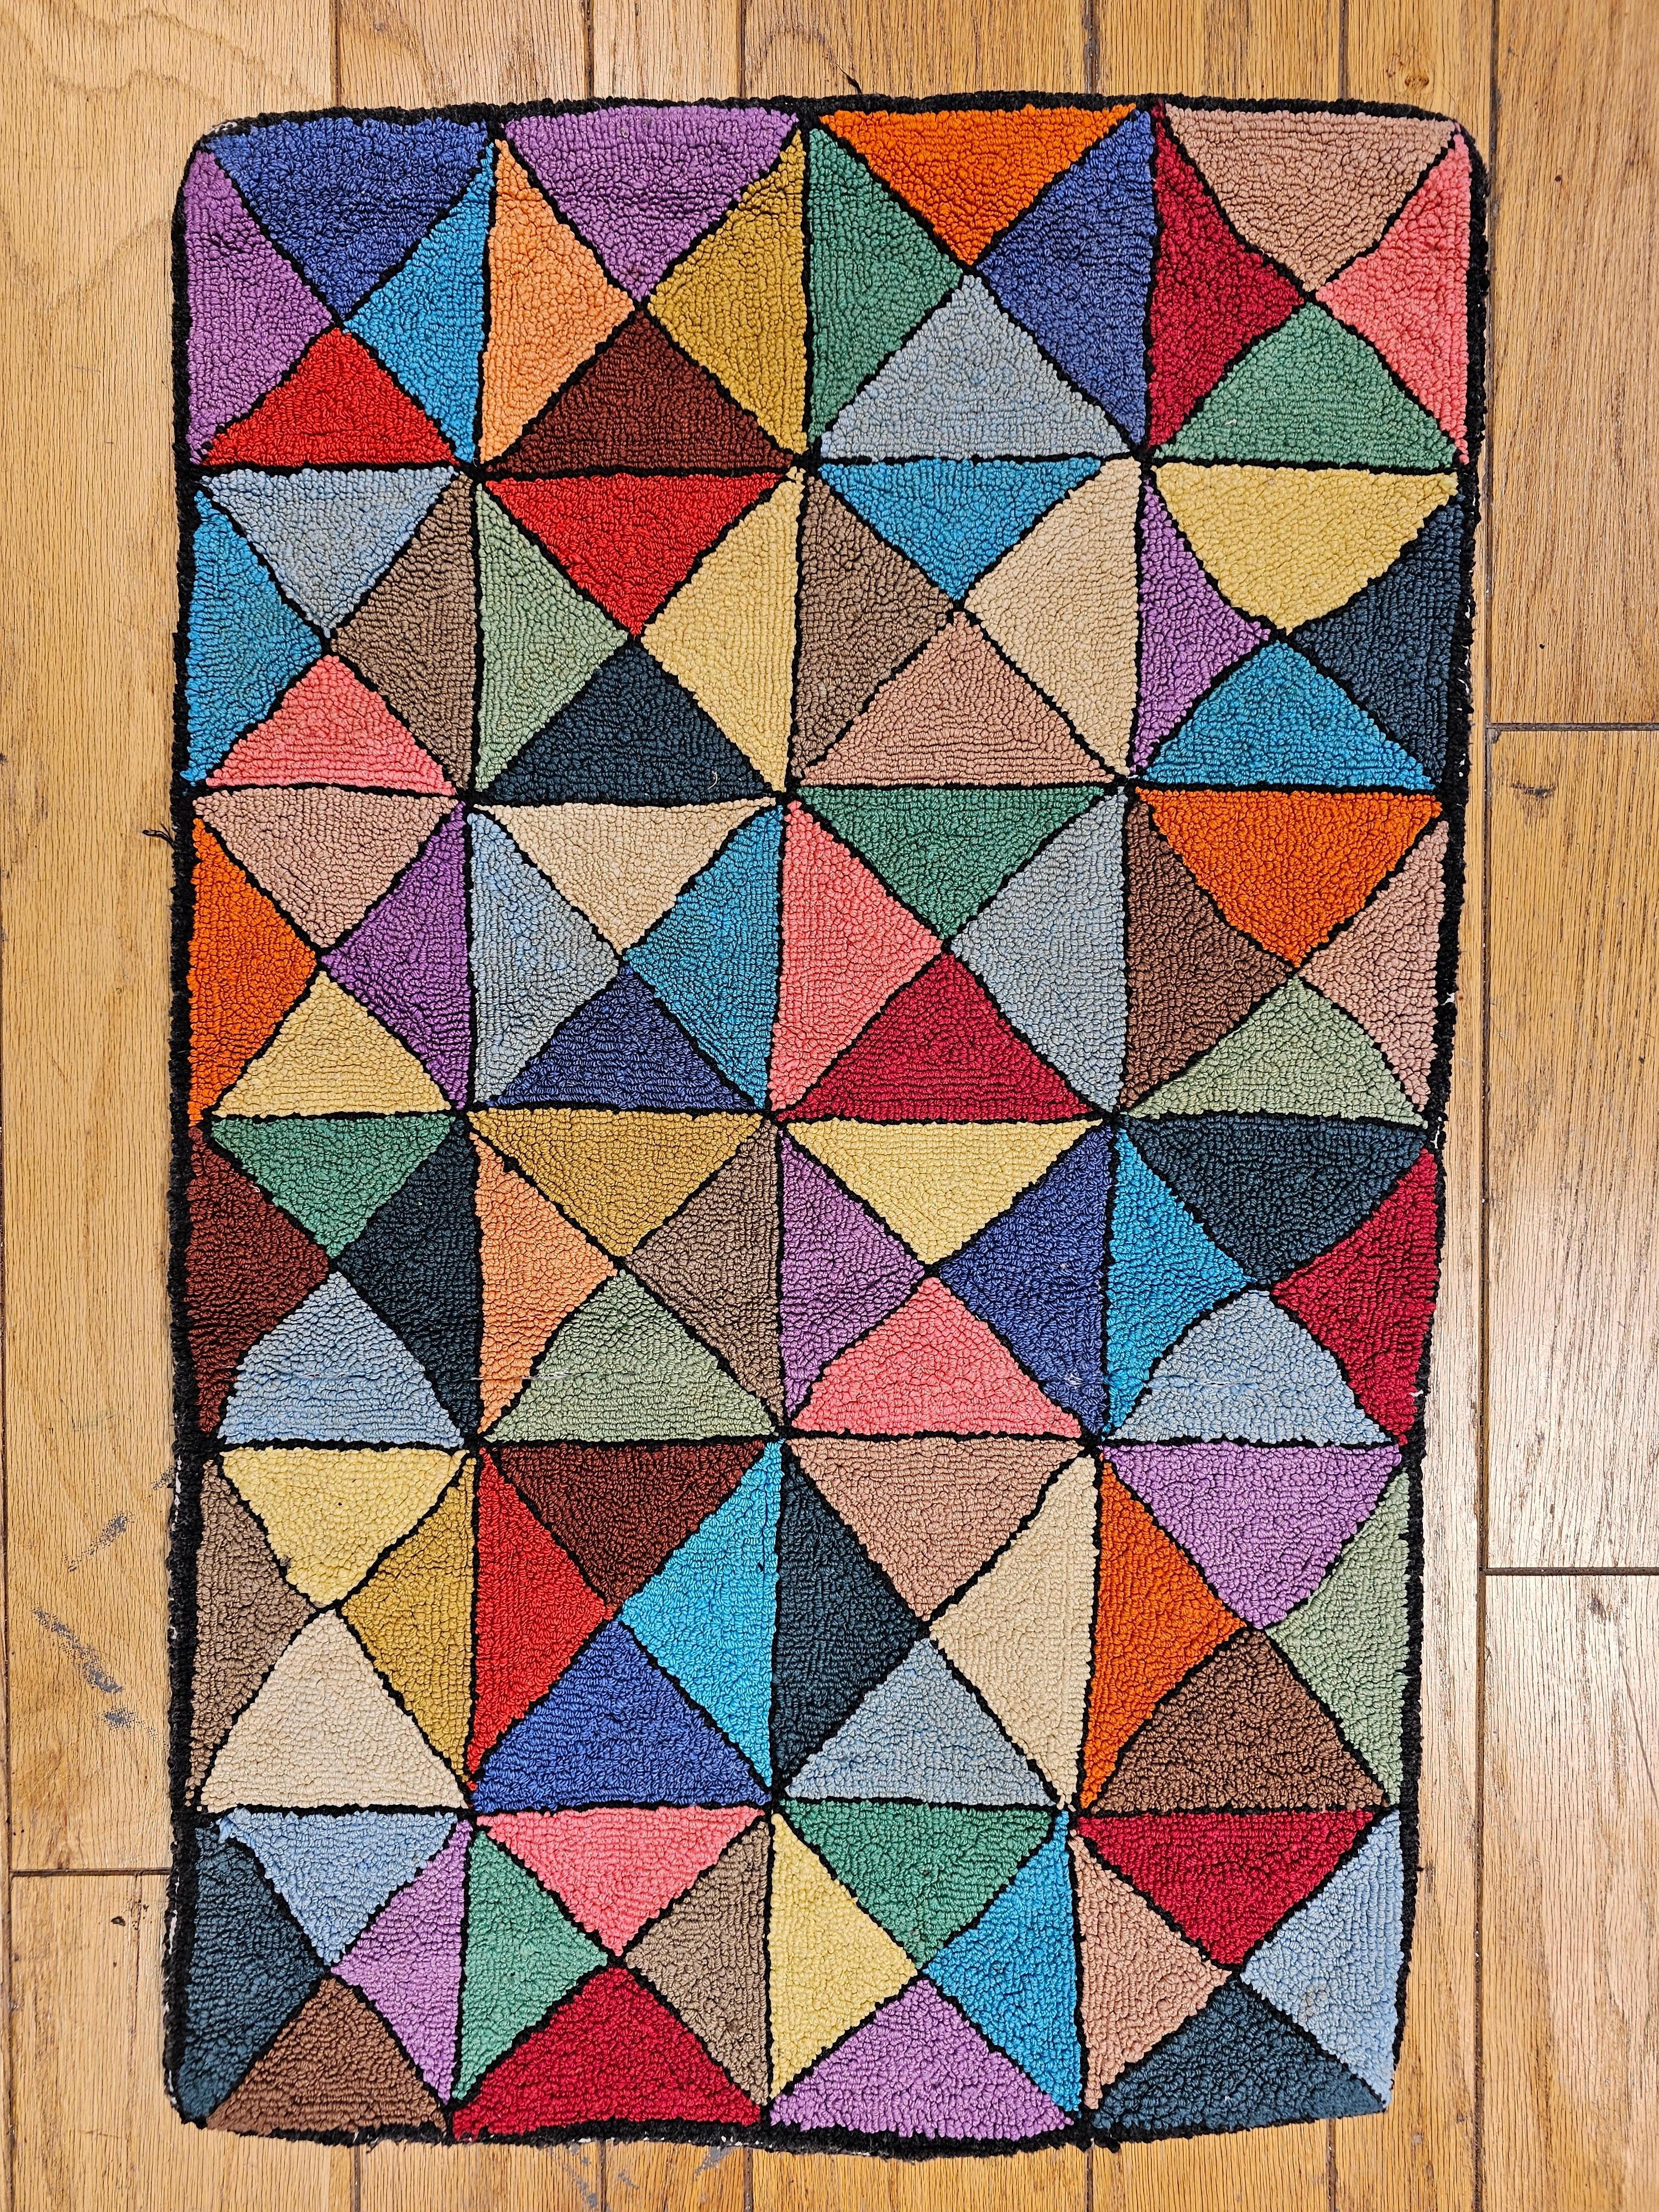 Vintage American hand hooked rug in a stripe pattern handcrafted in the 2nd quarter of the 1900s.  The hand hooked rug is in a multicolor block pattern in various brilliant colors.  The  hooked rugs from the late 19th and early 20th centuries are